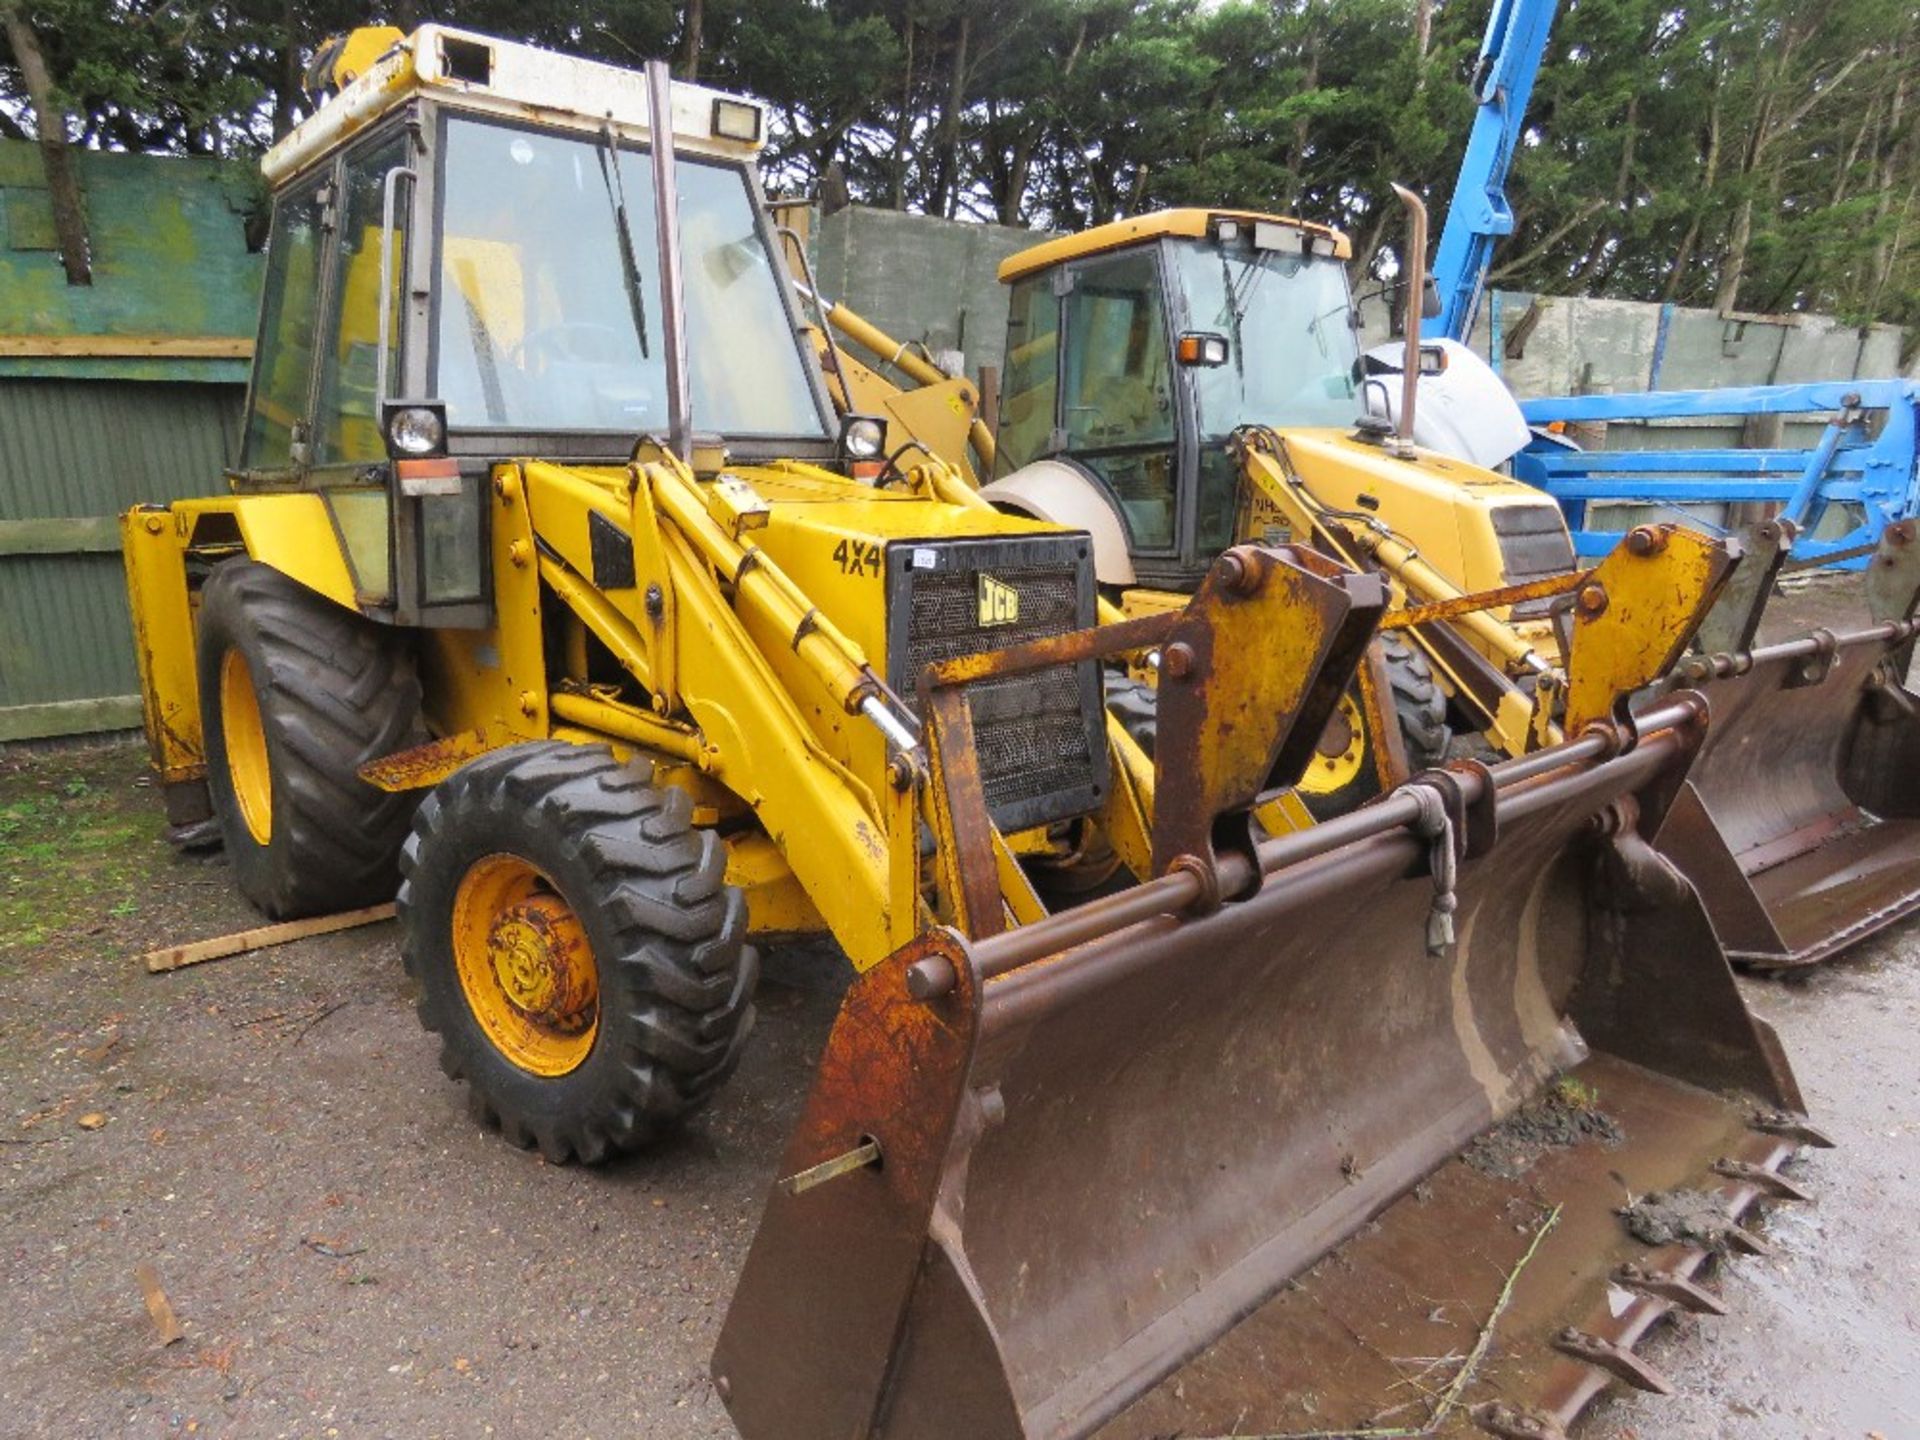 JCB 3CX SITEMASTER BACKHOE LOADER REG:F539 SDE. TYPE 3CX-4/34 SN:509602.F. WITH 4 IN 1 BUCKET PLUS